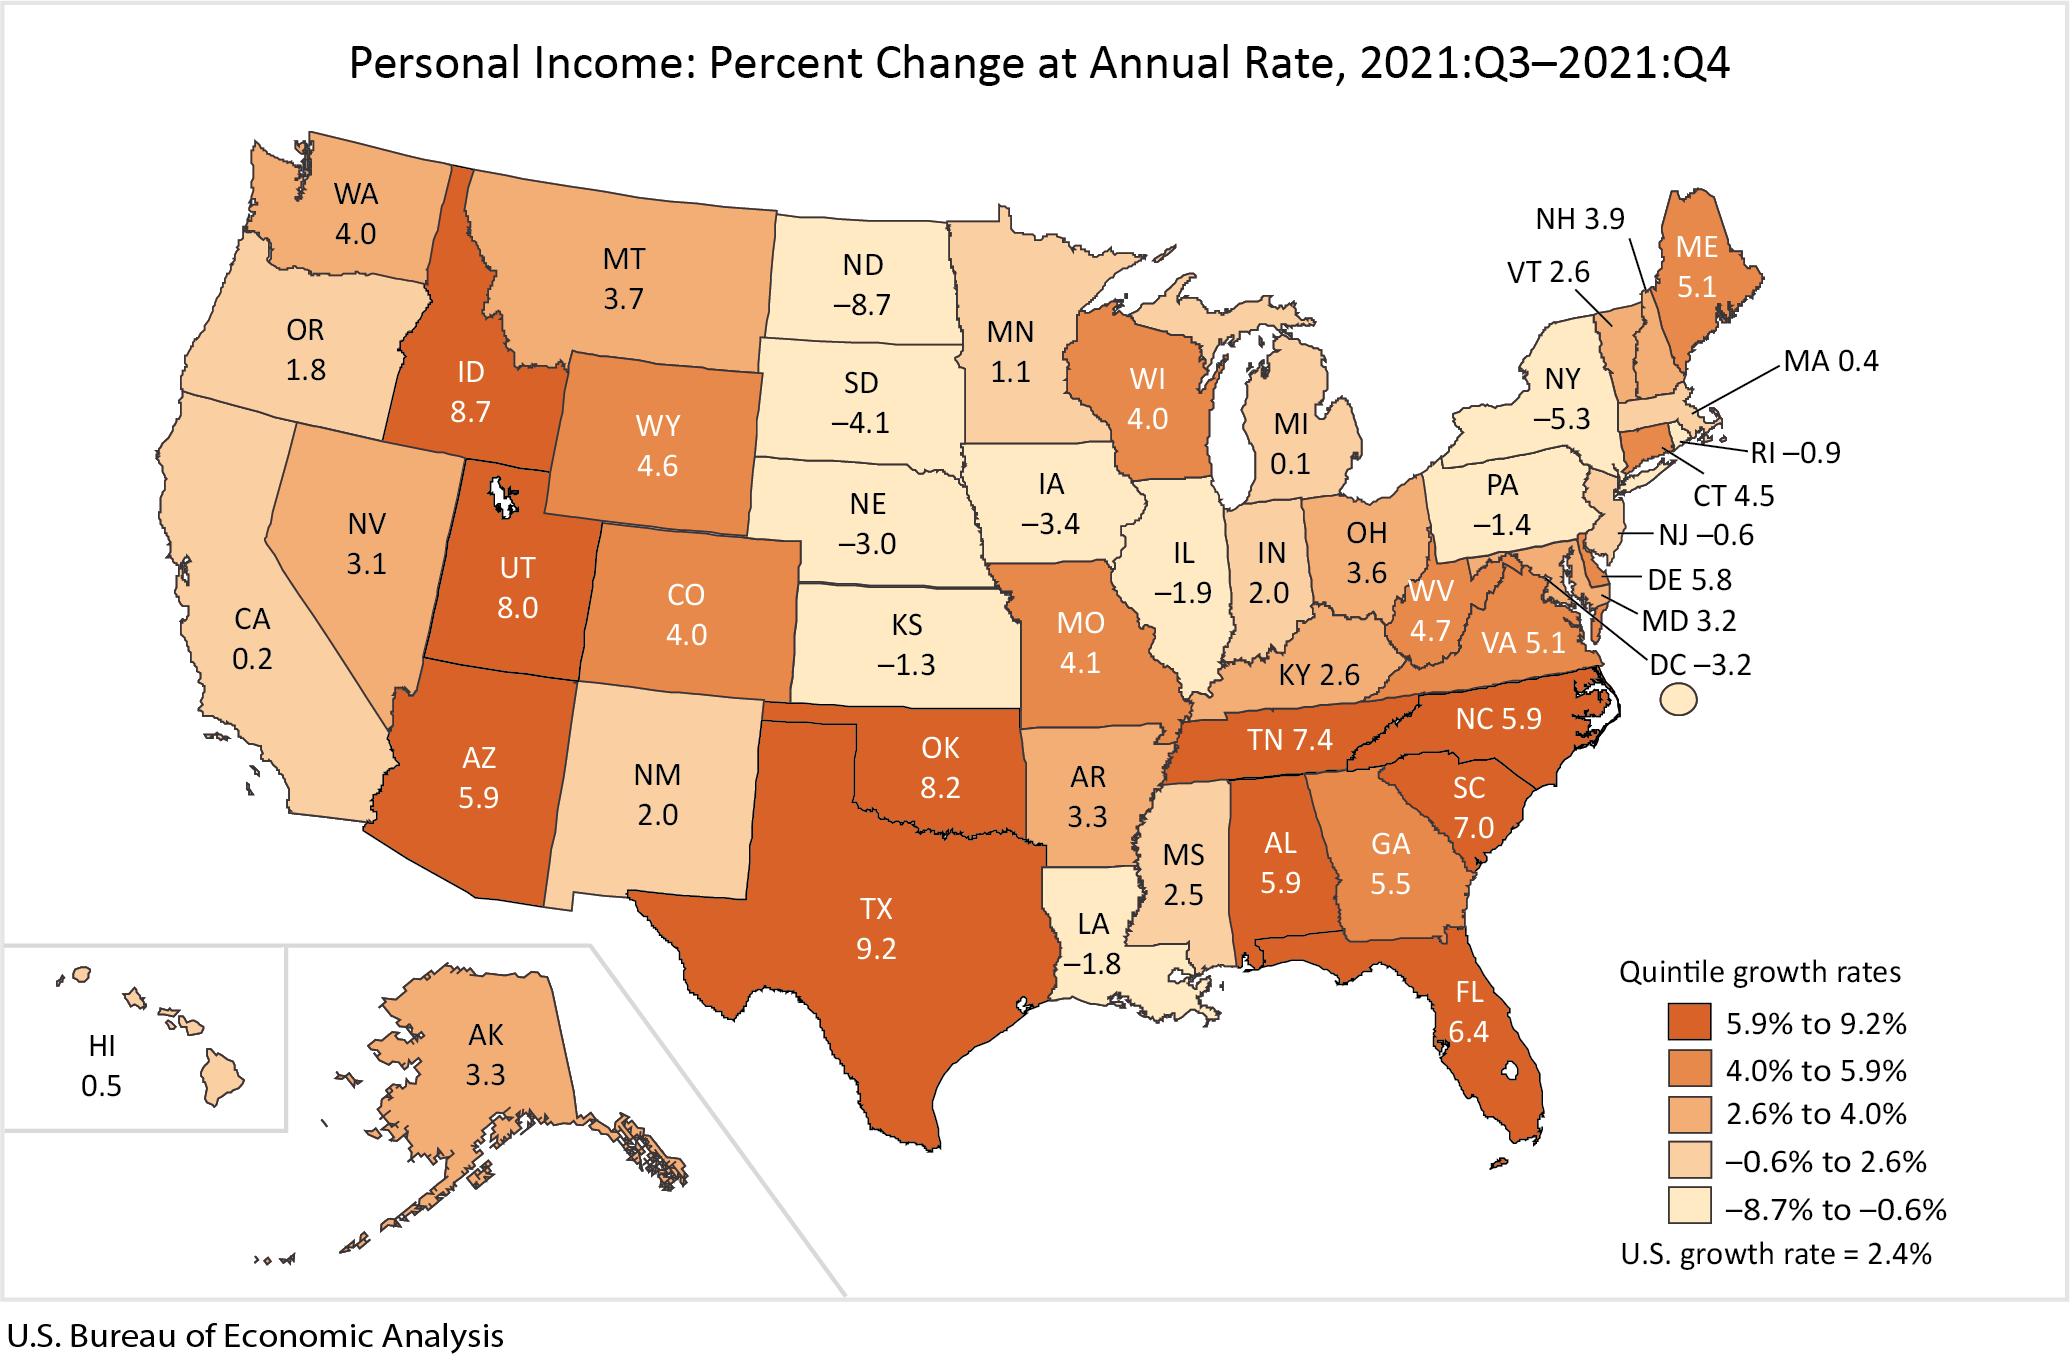 Map: Personal Income: Percent Change at Annual Rate, 2021:Q3-2021:Q4